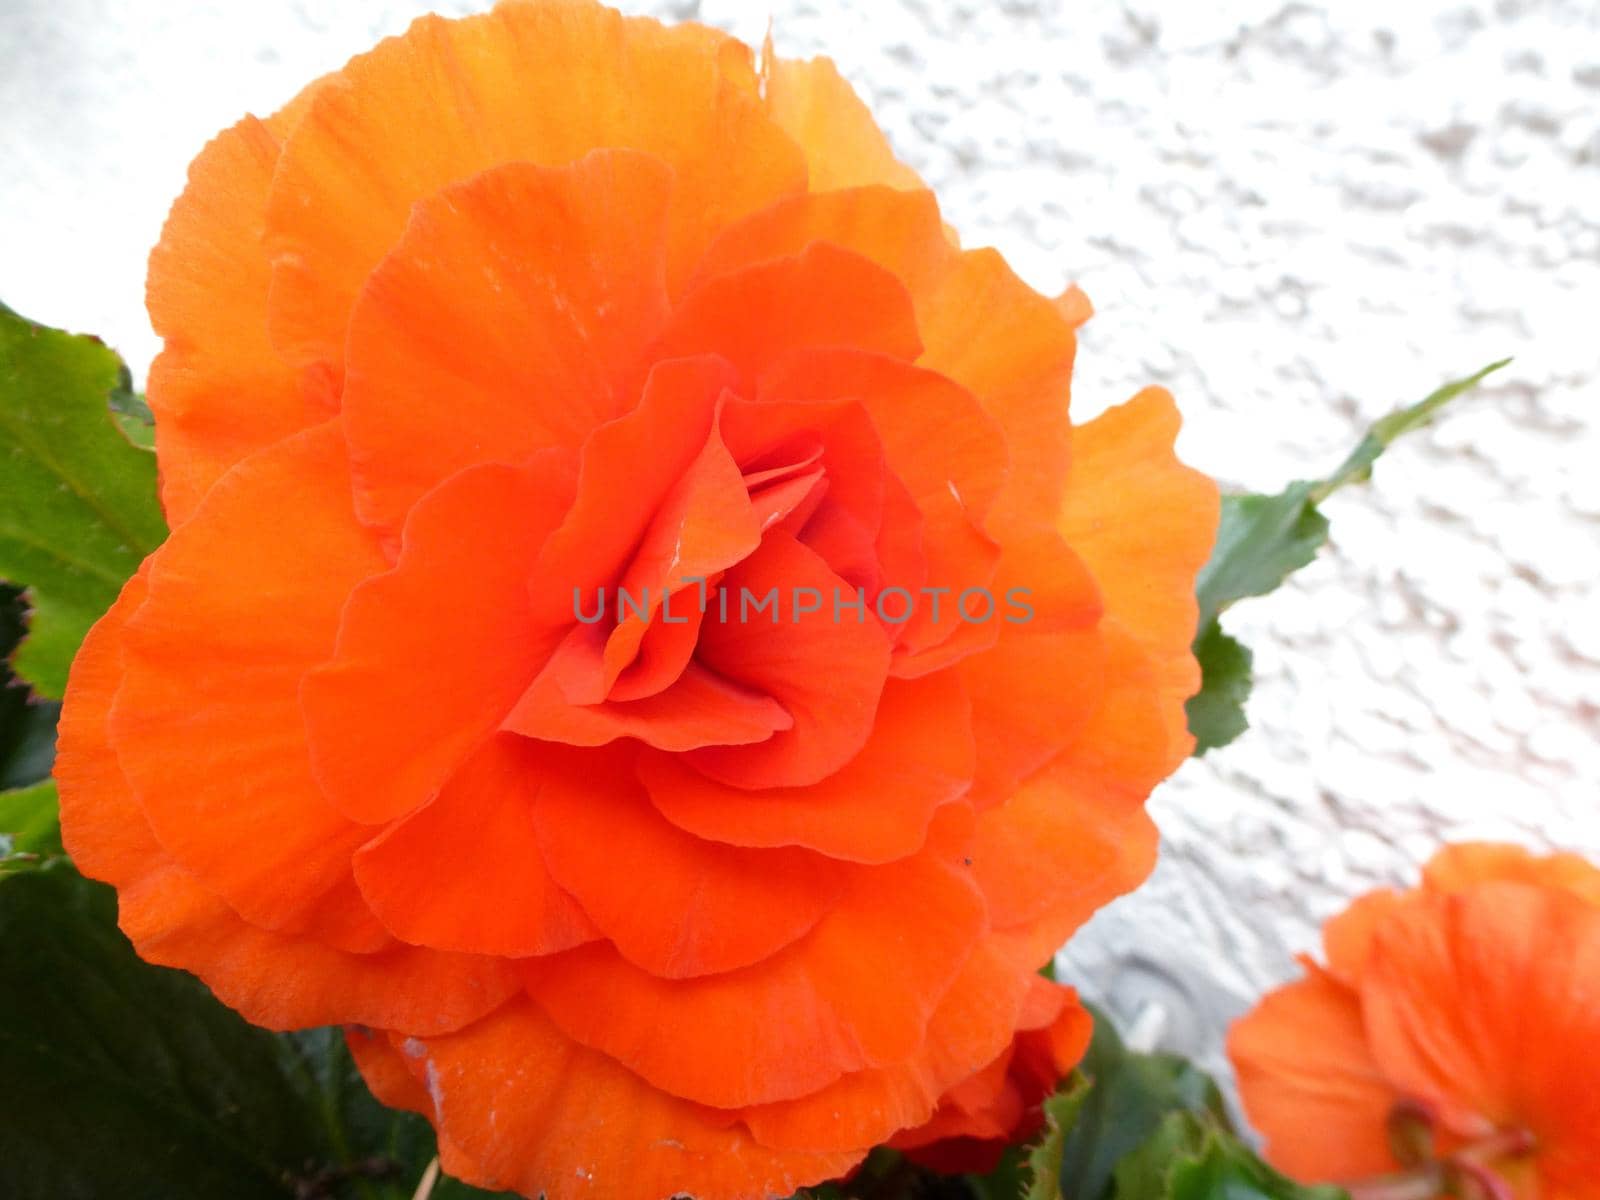 Extreme Macro Close Up of Bright Orange Begonia Flowers with Green Leaves Blooming Outdoors in front of White Stucco Wall